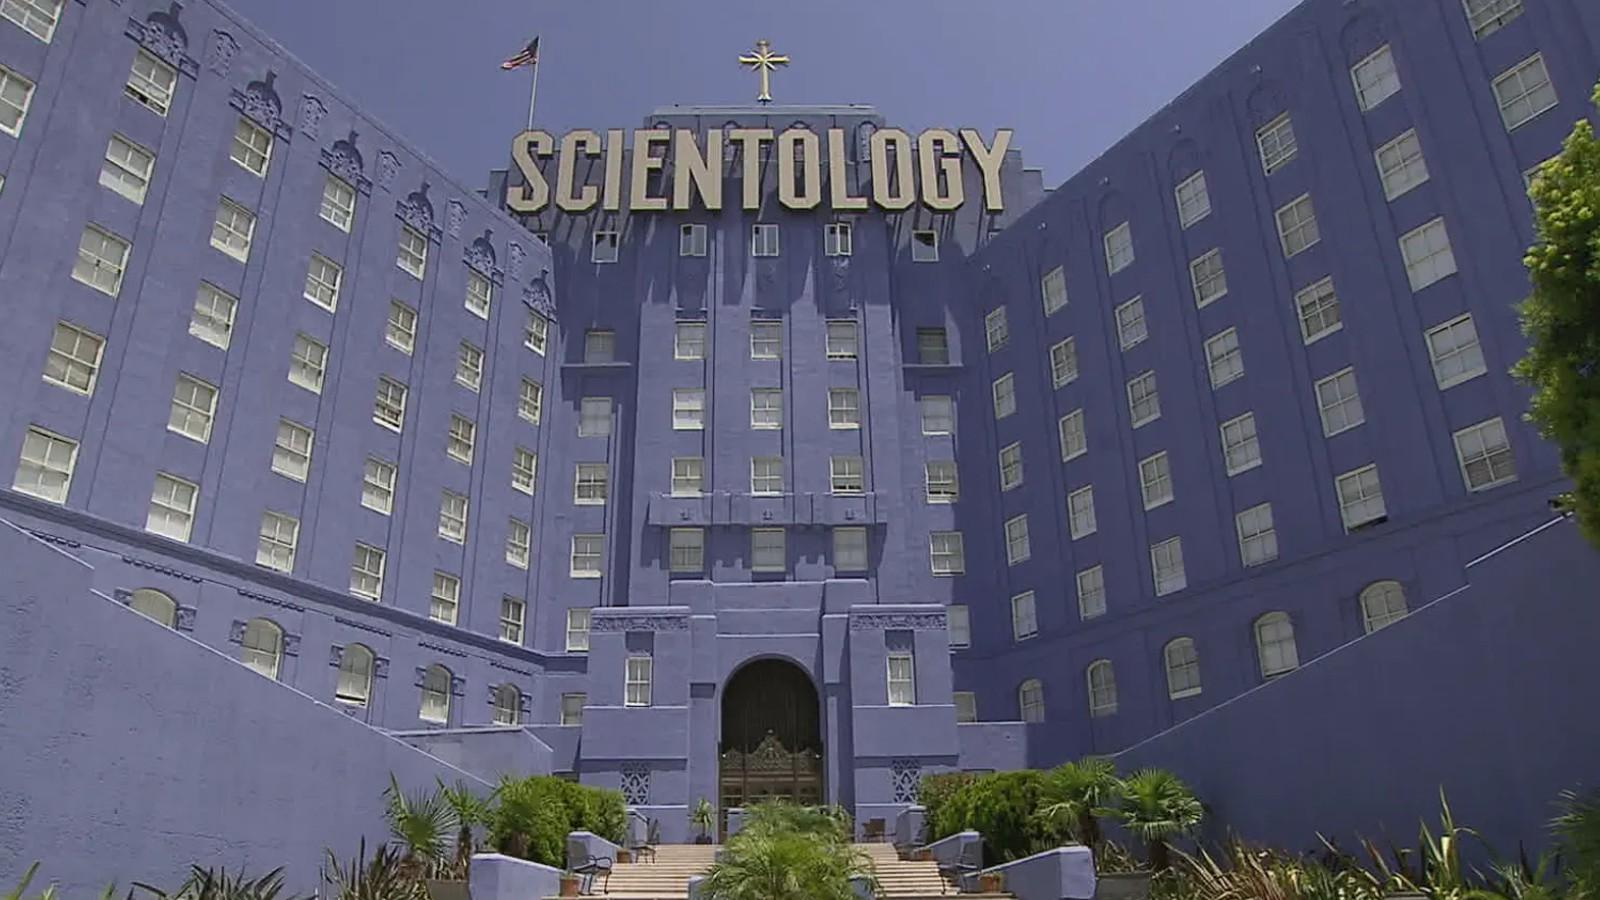 A Scientology center, as depicted in documentary Going Clear.